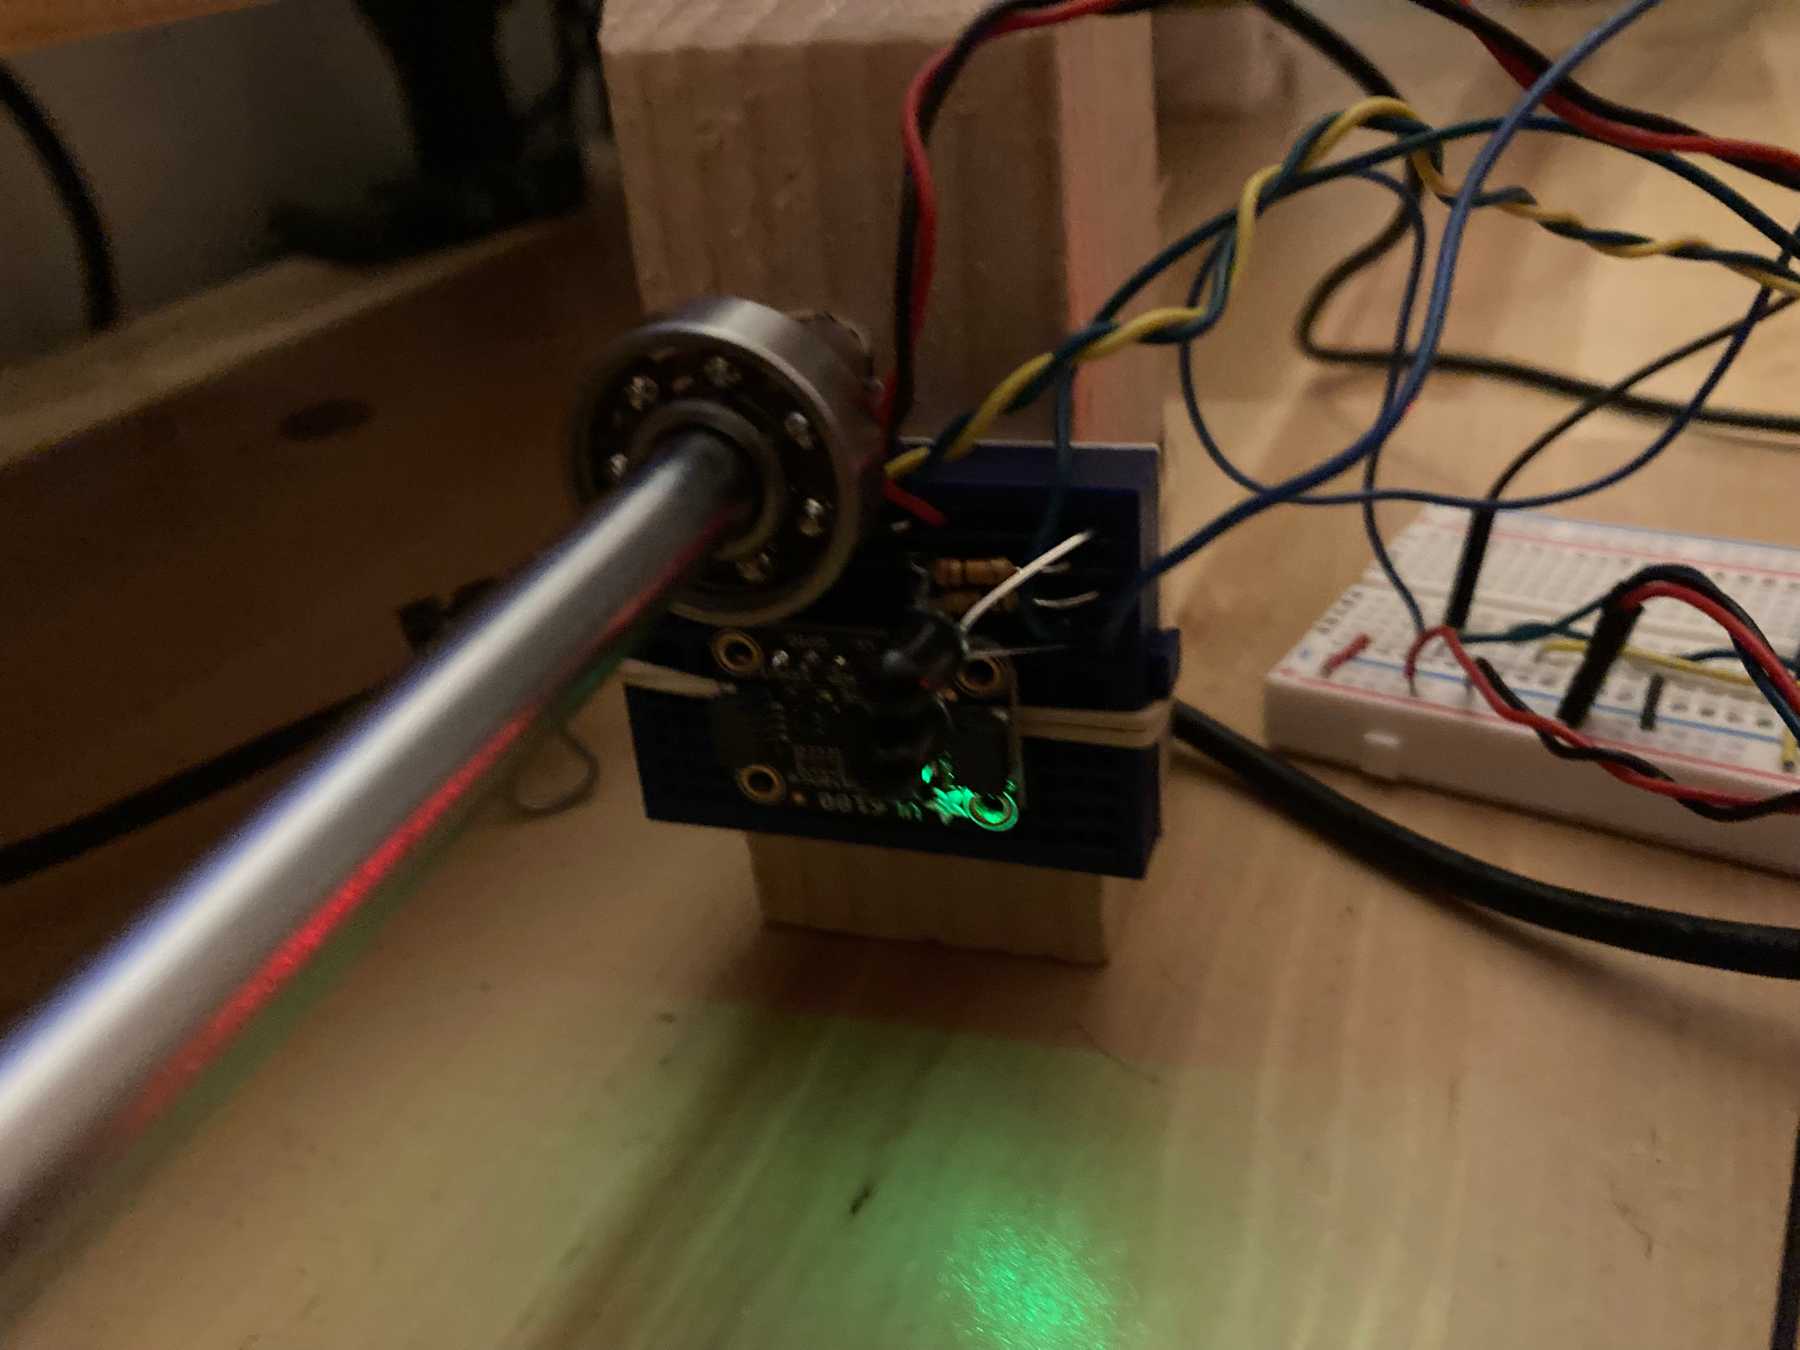 Prototyping the sensor with a rubber band